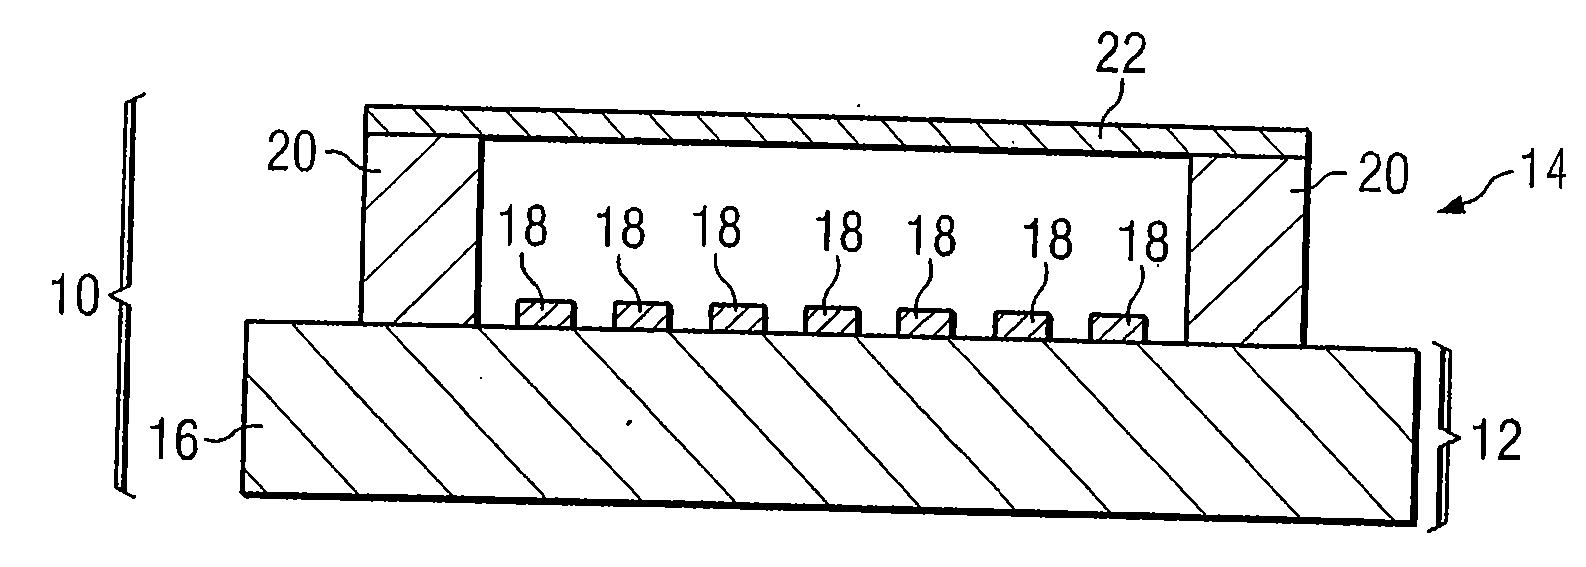 System and Method for Automatically Mounting a Pellicle Assembly on a Photomask